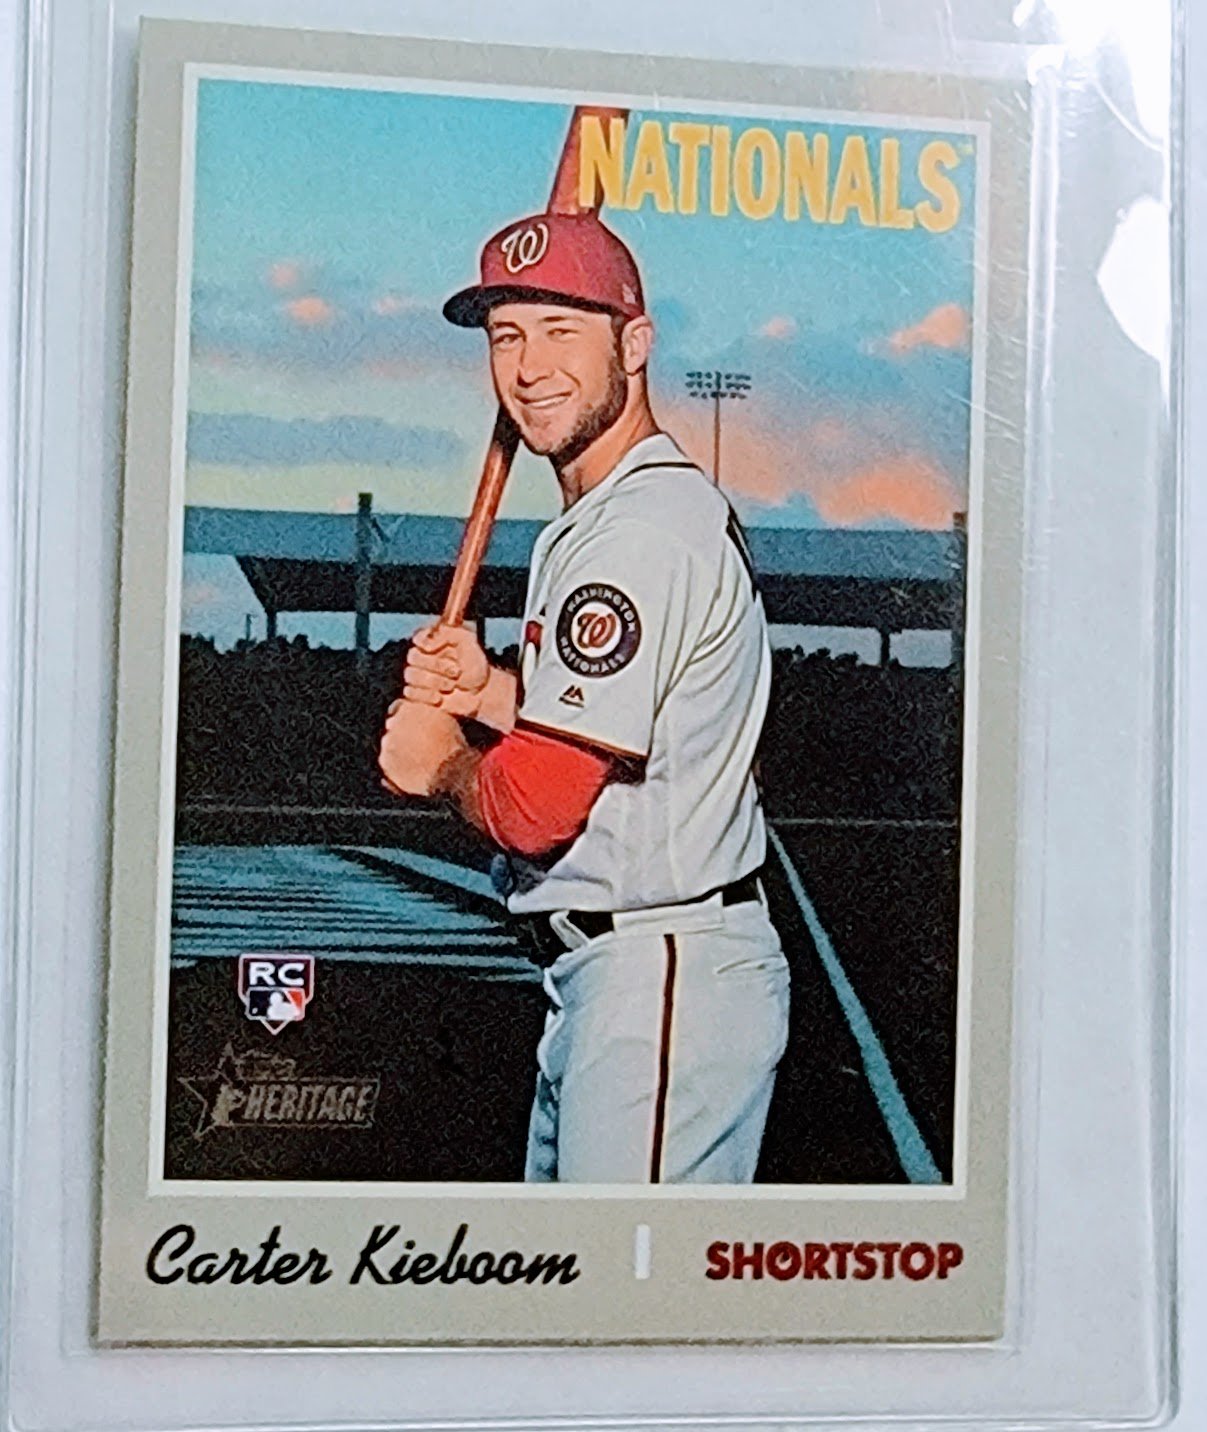 2019 Topps Heritage Carter Kieboom Rookie Baseball Card TPTV simple Xclusive Collectibles   